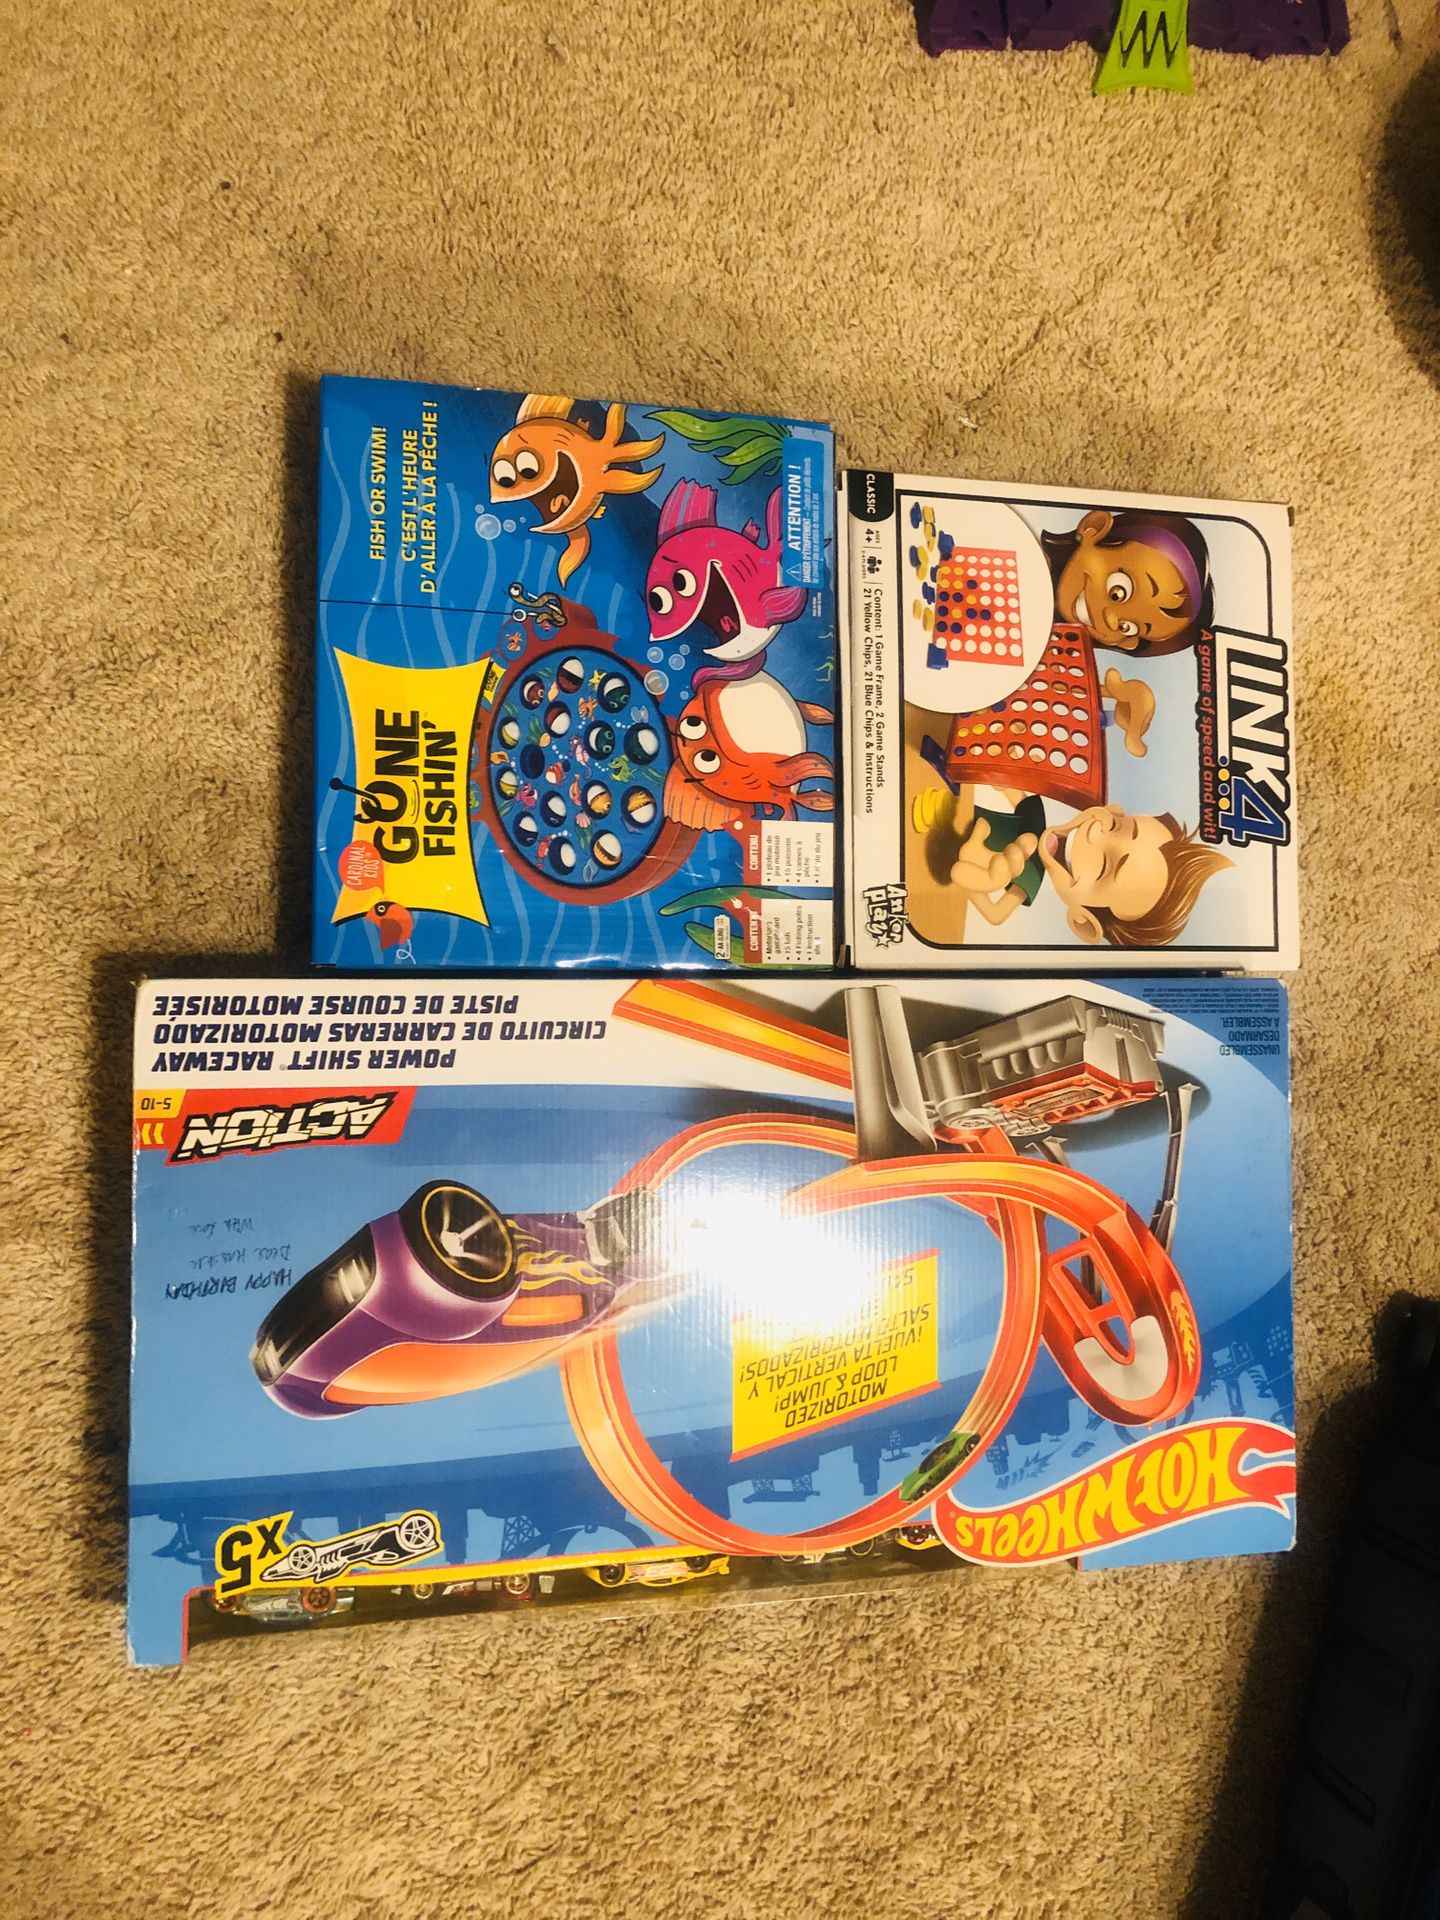 Hot Wheels PowerShift Raceway Track & 5-Race Vehicles Set15$,gold fishing 3$,anker play3.all 3 in20$